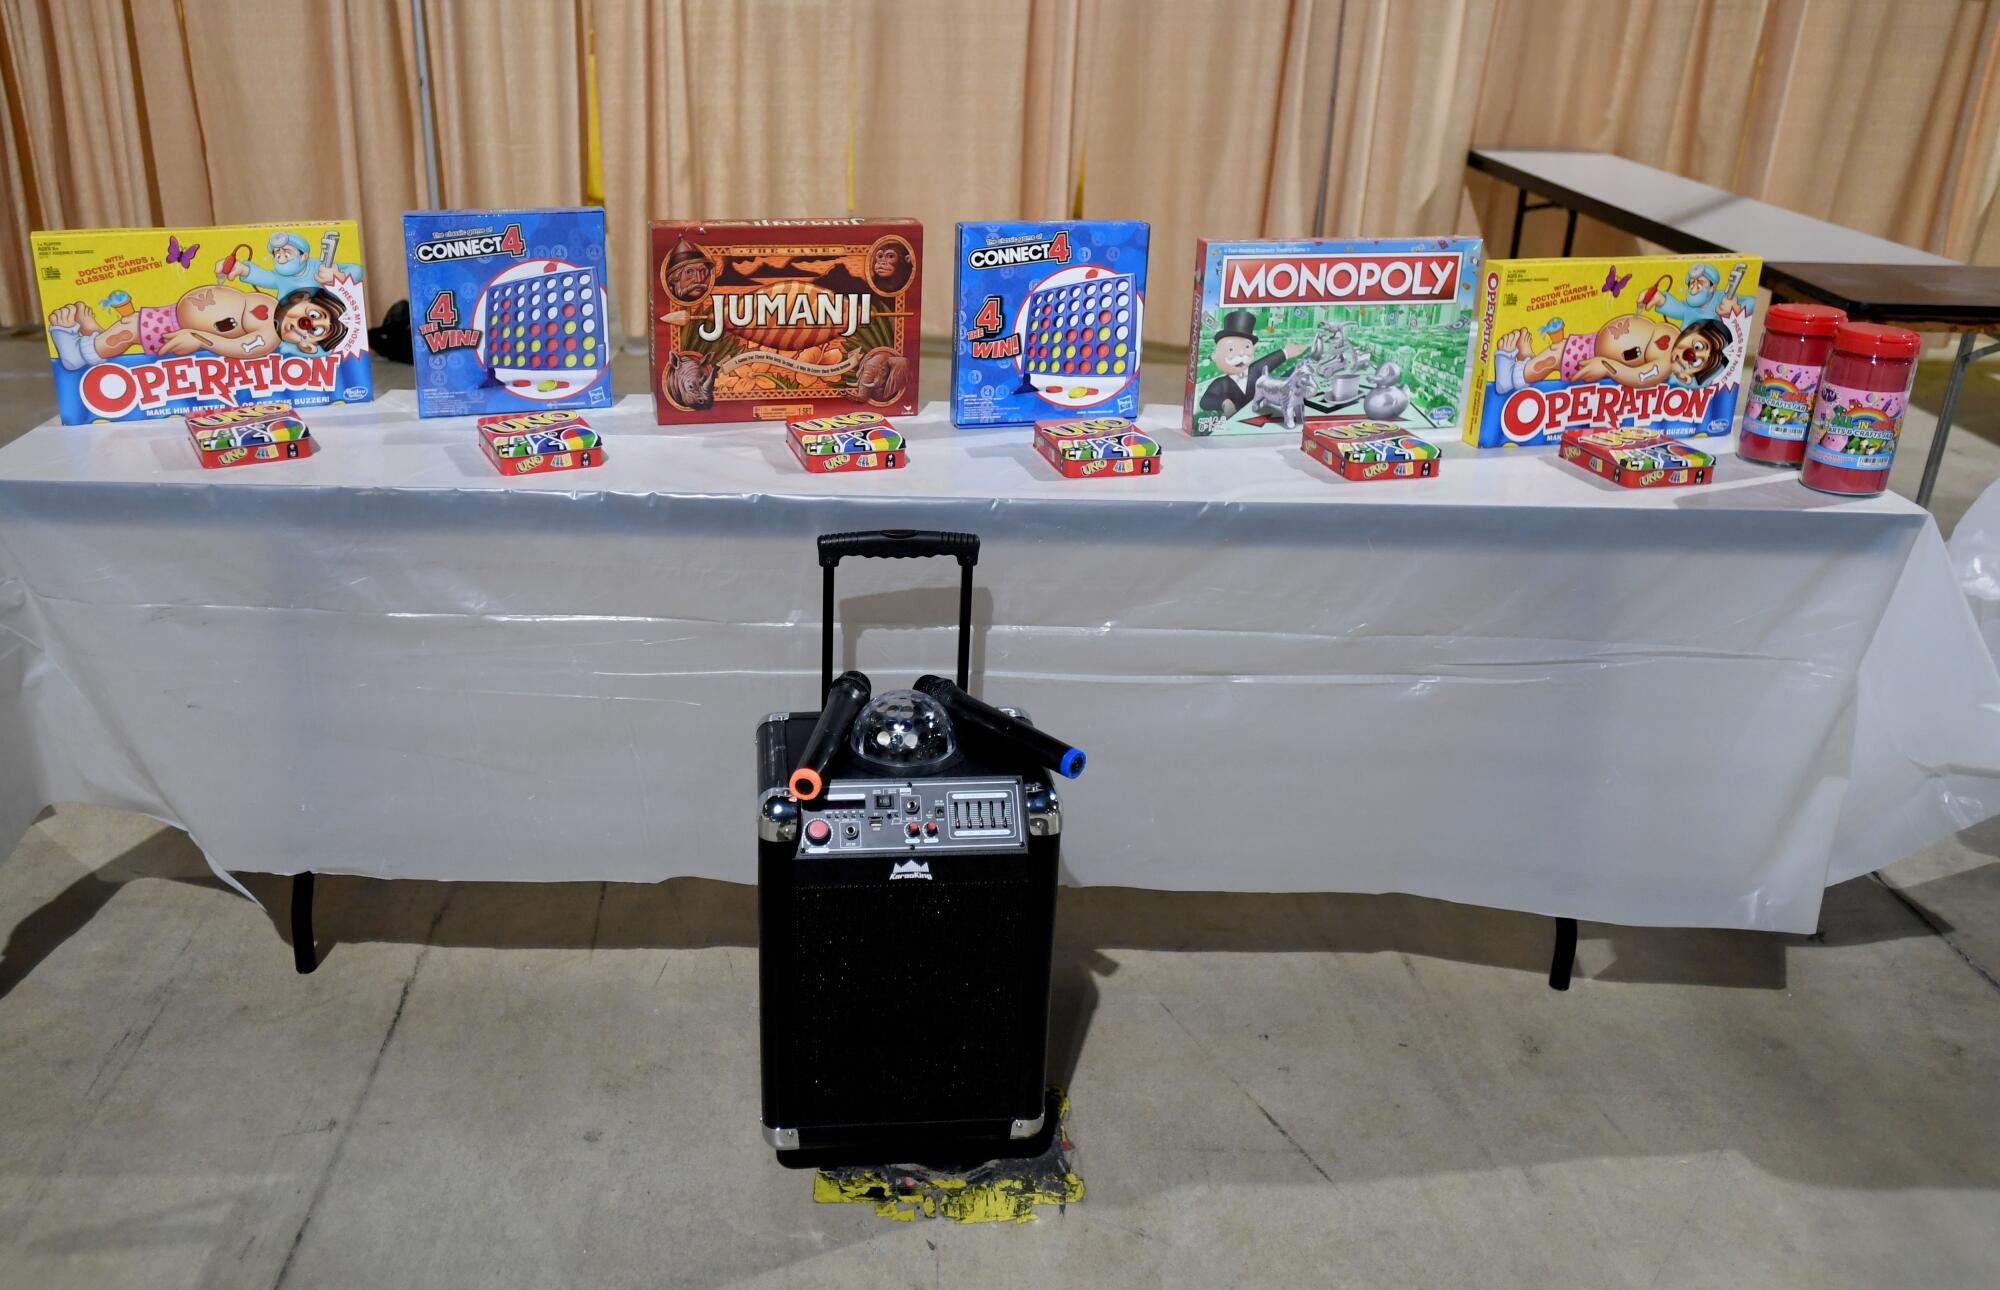 Board games, including Operation, Connect 4 and Monopoly are displayed on a table